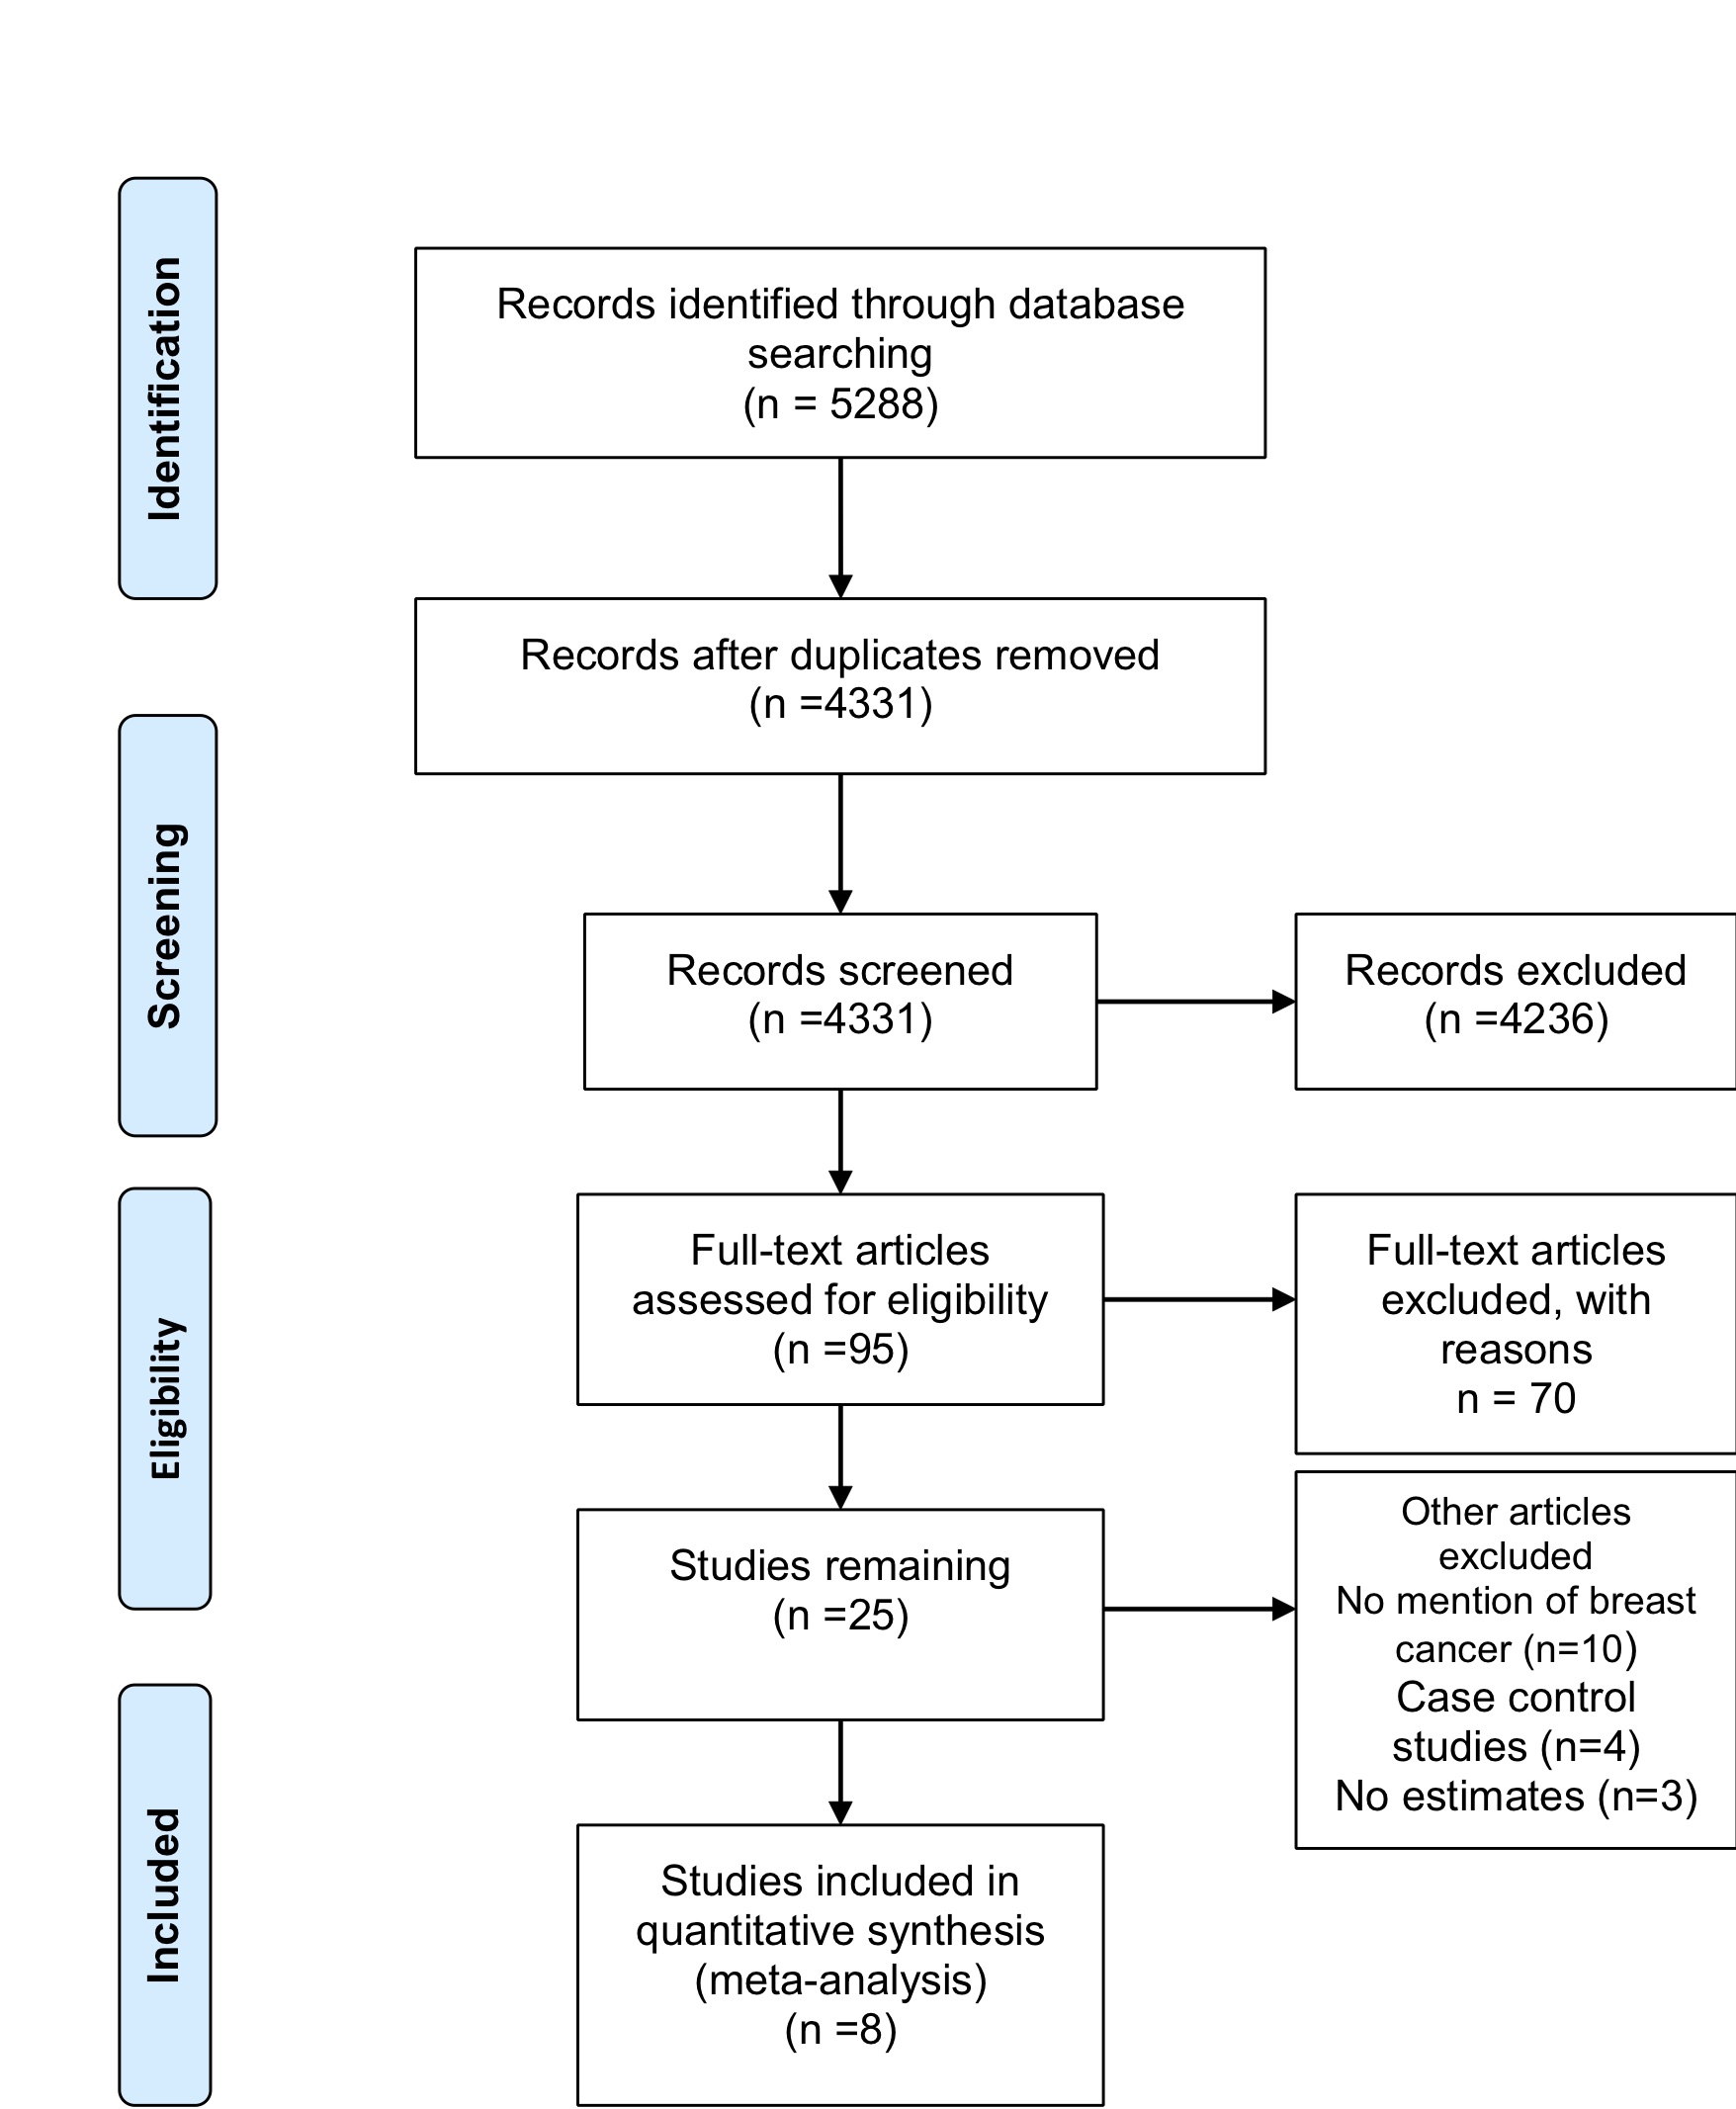 Figure 1: PRISMA Flow Diagram for the included studies. The flow diagram indicates the number of studies included in the meta-analysis at each stage. Adapted from: Moher et al., 2009).